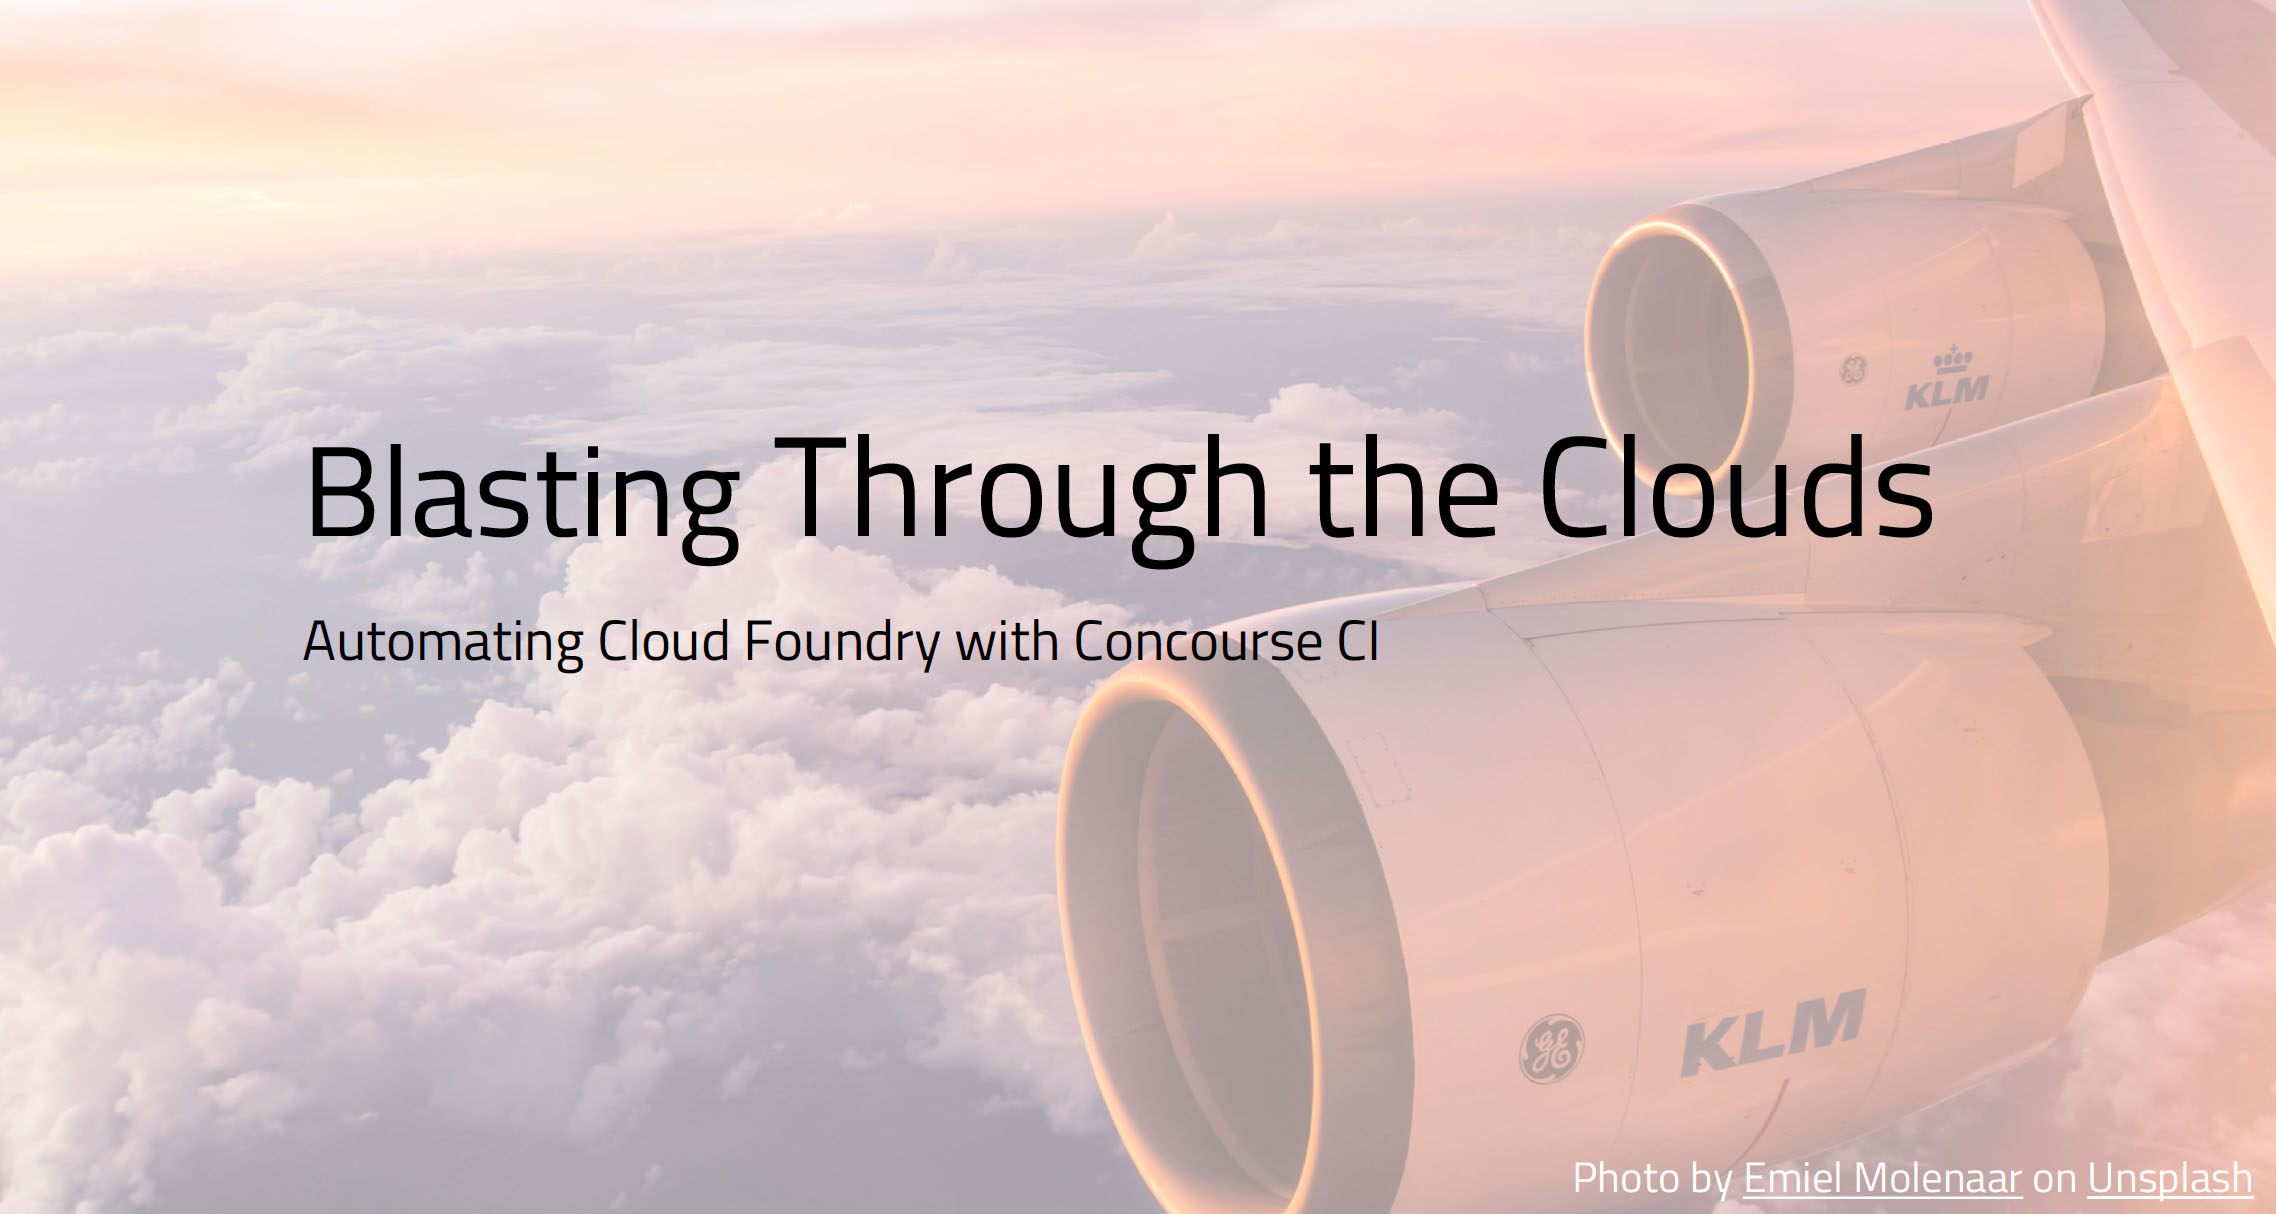 Blasting Through the Clouds: Automating Cloud Foundry with Concourse CI